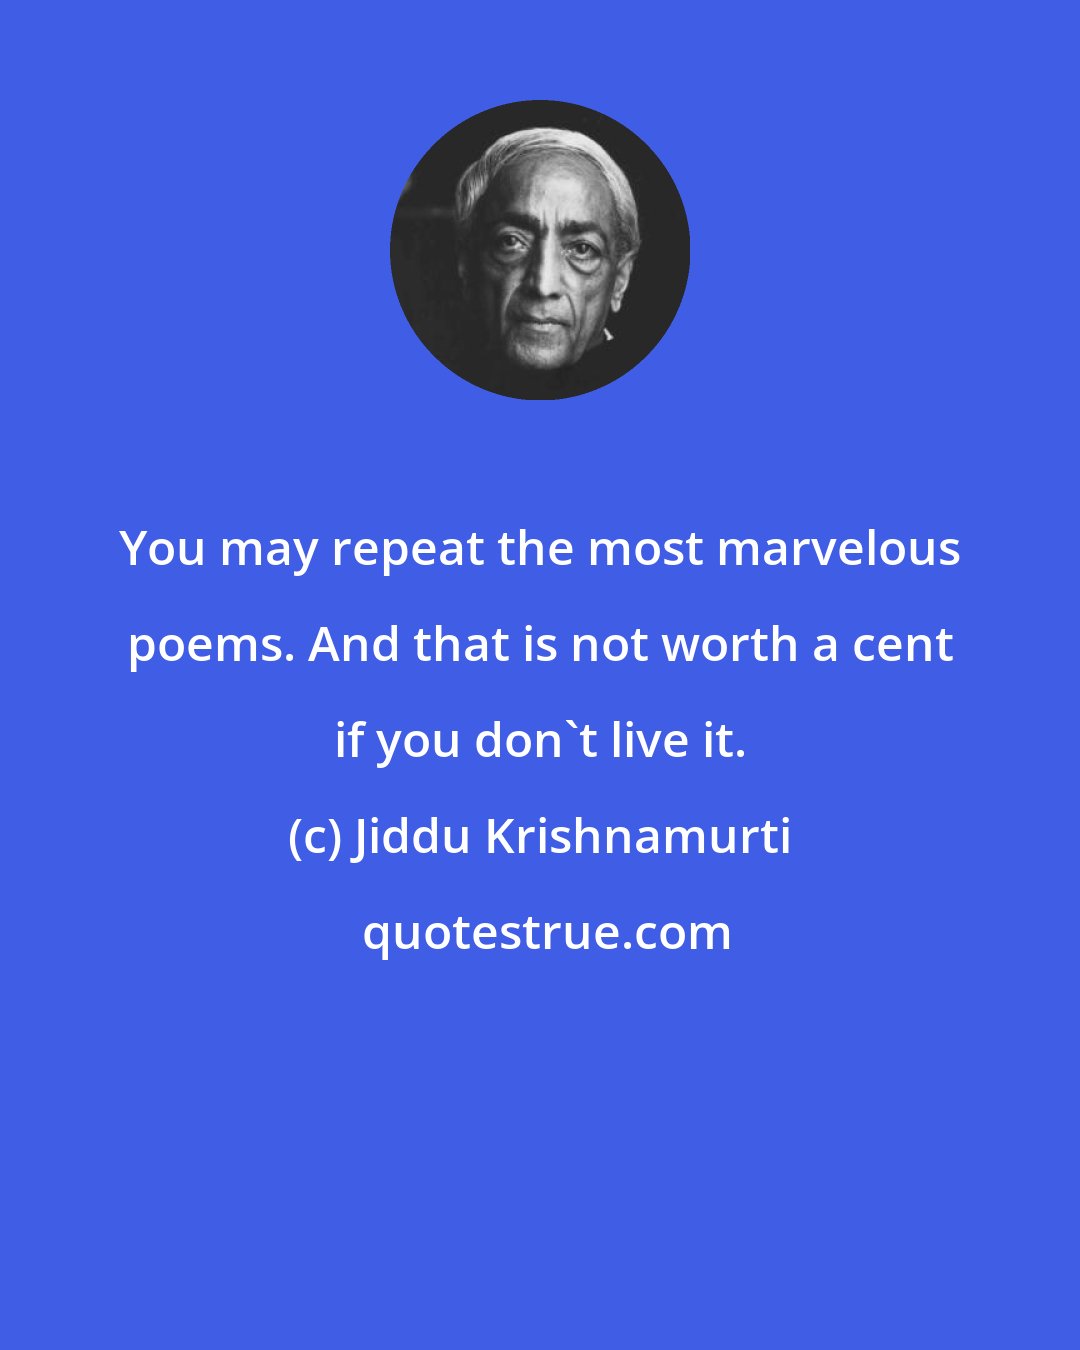 Jiddu Krishnamurti: You may repeat the most marvelous poems. And that is not worth a cent if you don't live it.